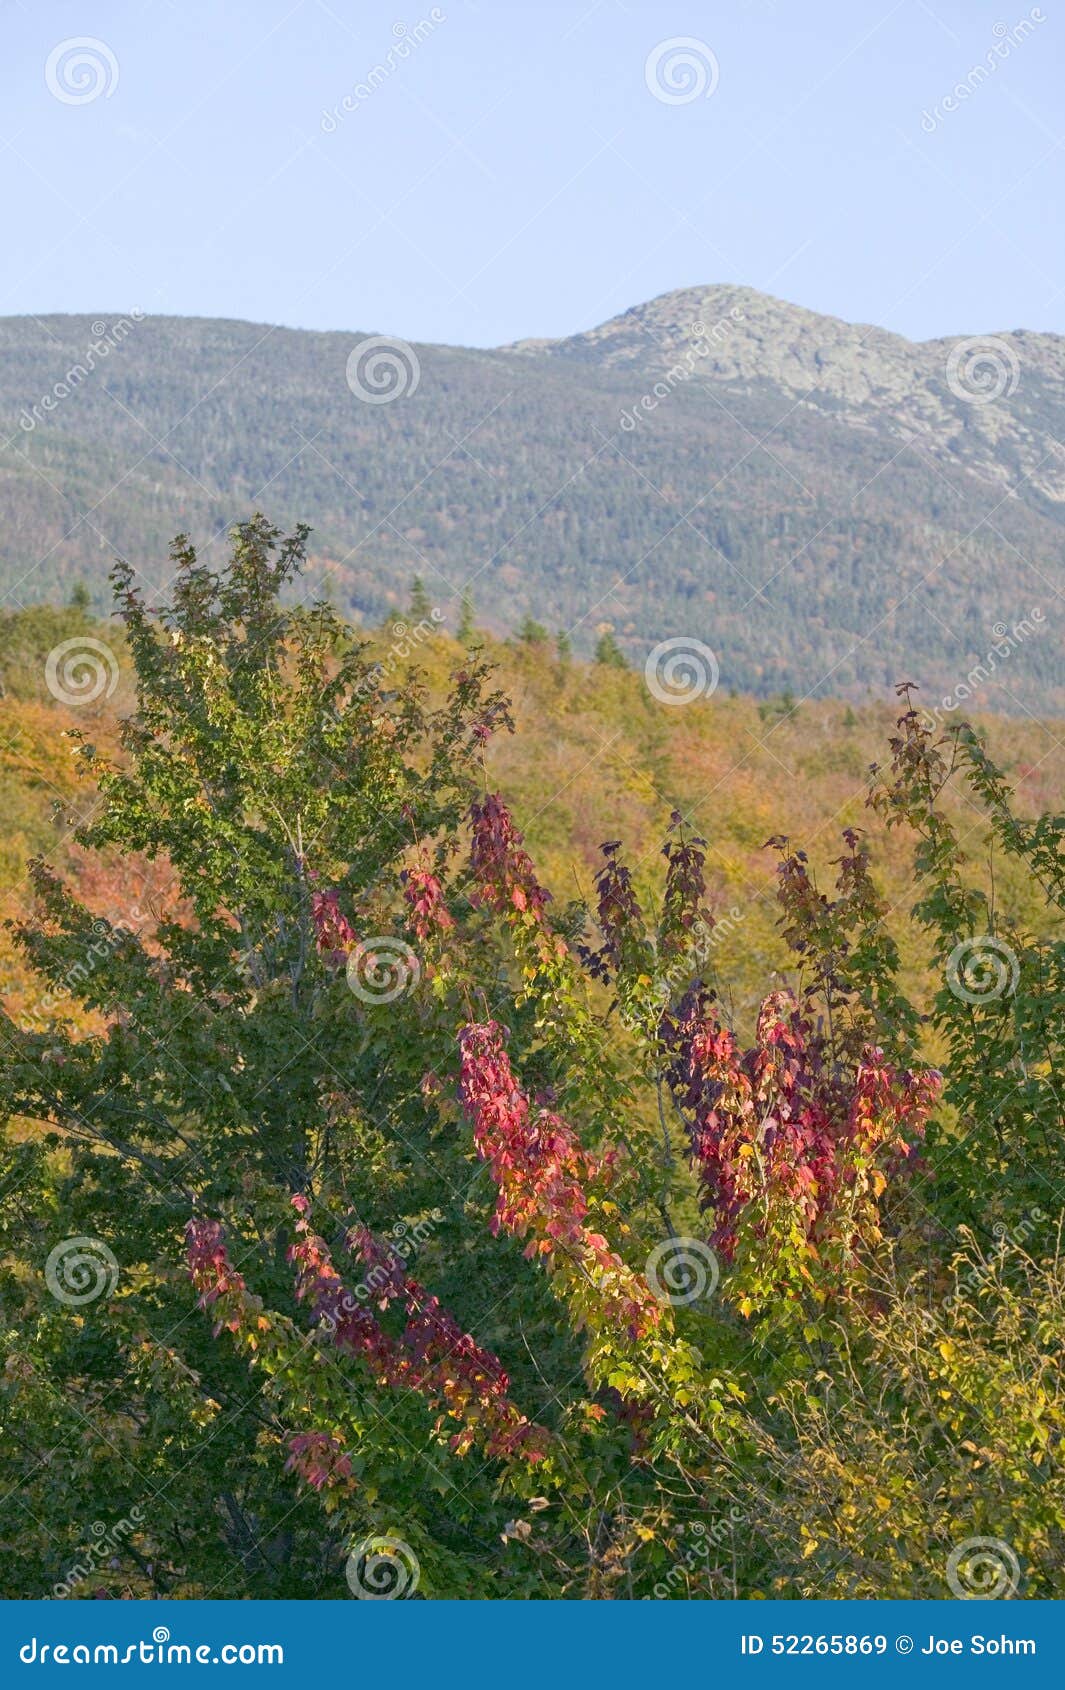 crawford notch state park in the white mountains, new hampshire